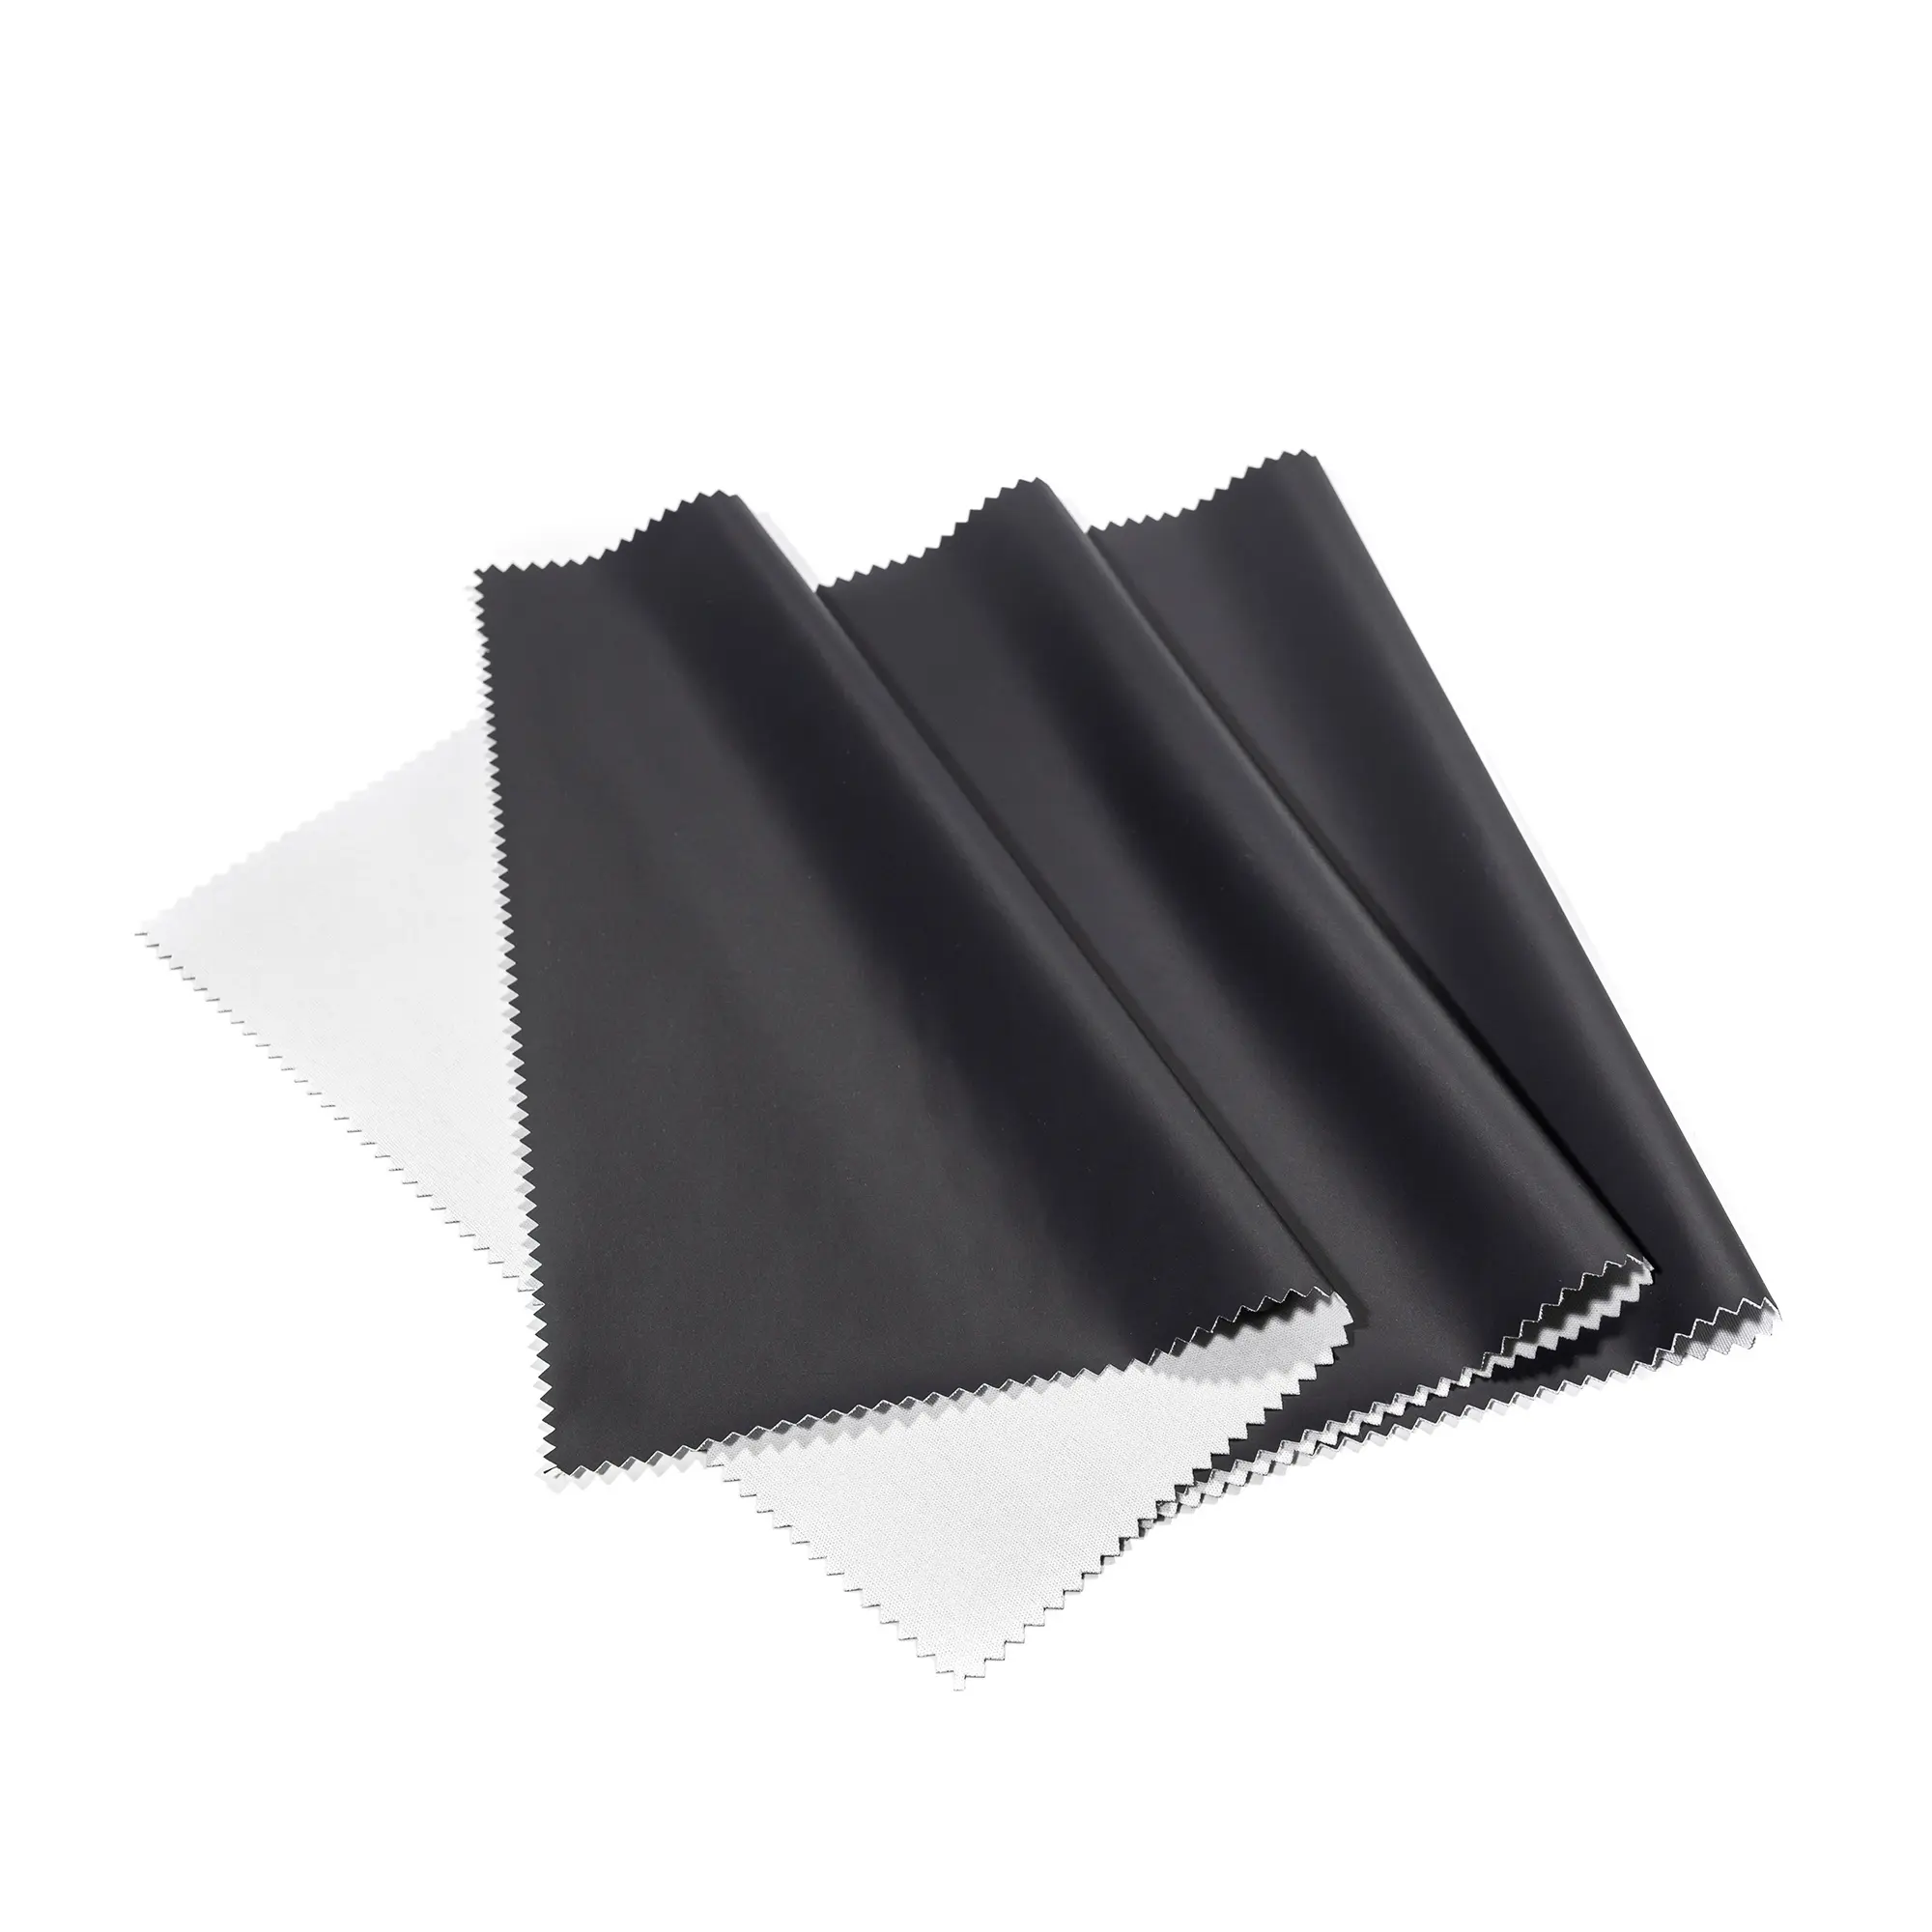 Elastic PU Garment leather fabric for outdoor sportswear material coated leather